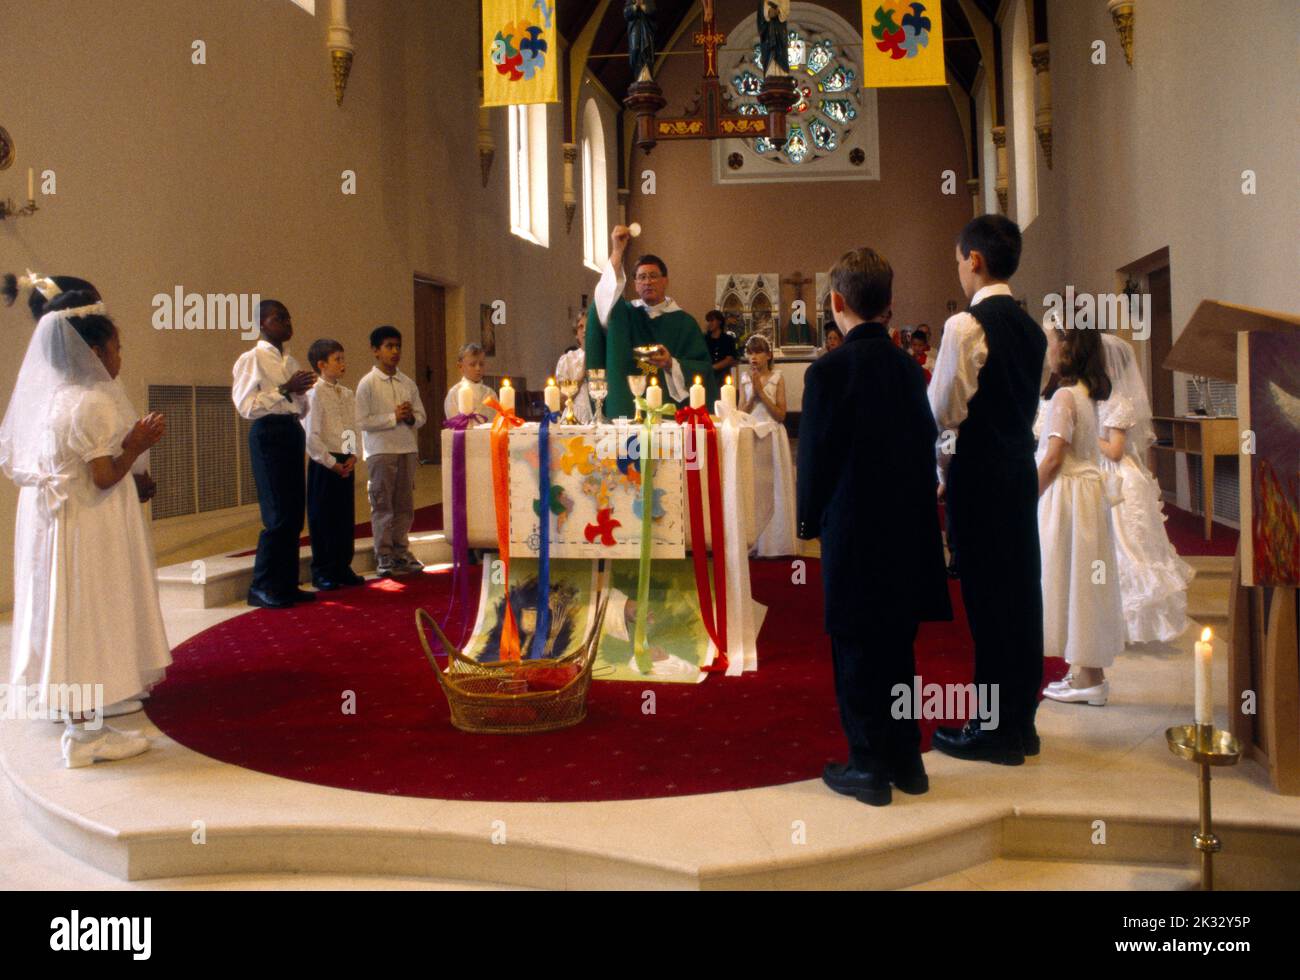 Priest at Altar performing the Eucharist at First Communion St Joseph's Church Roehampton London England Stock Photo